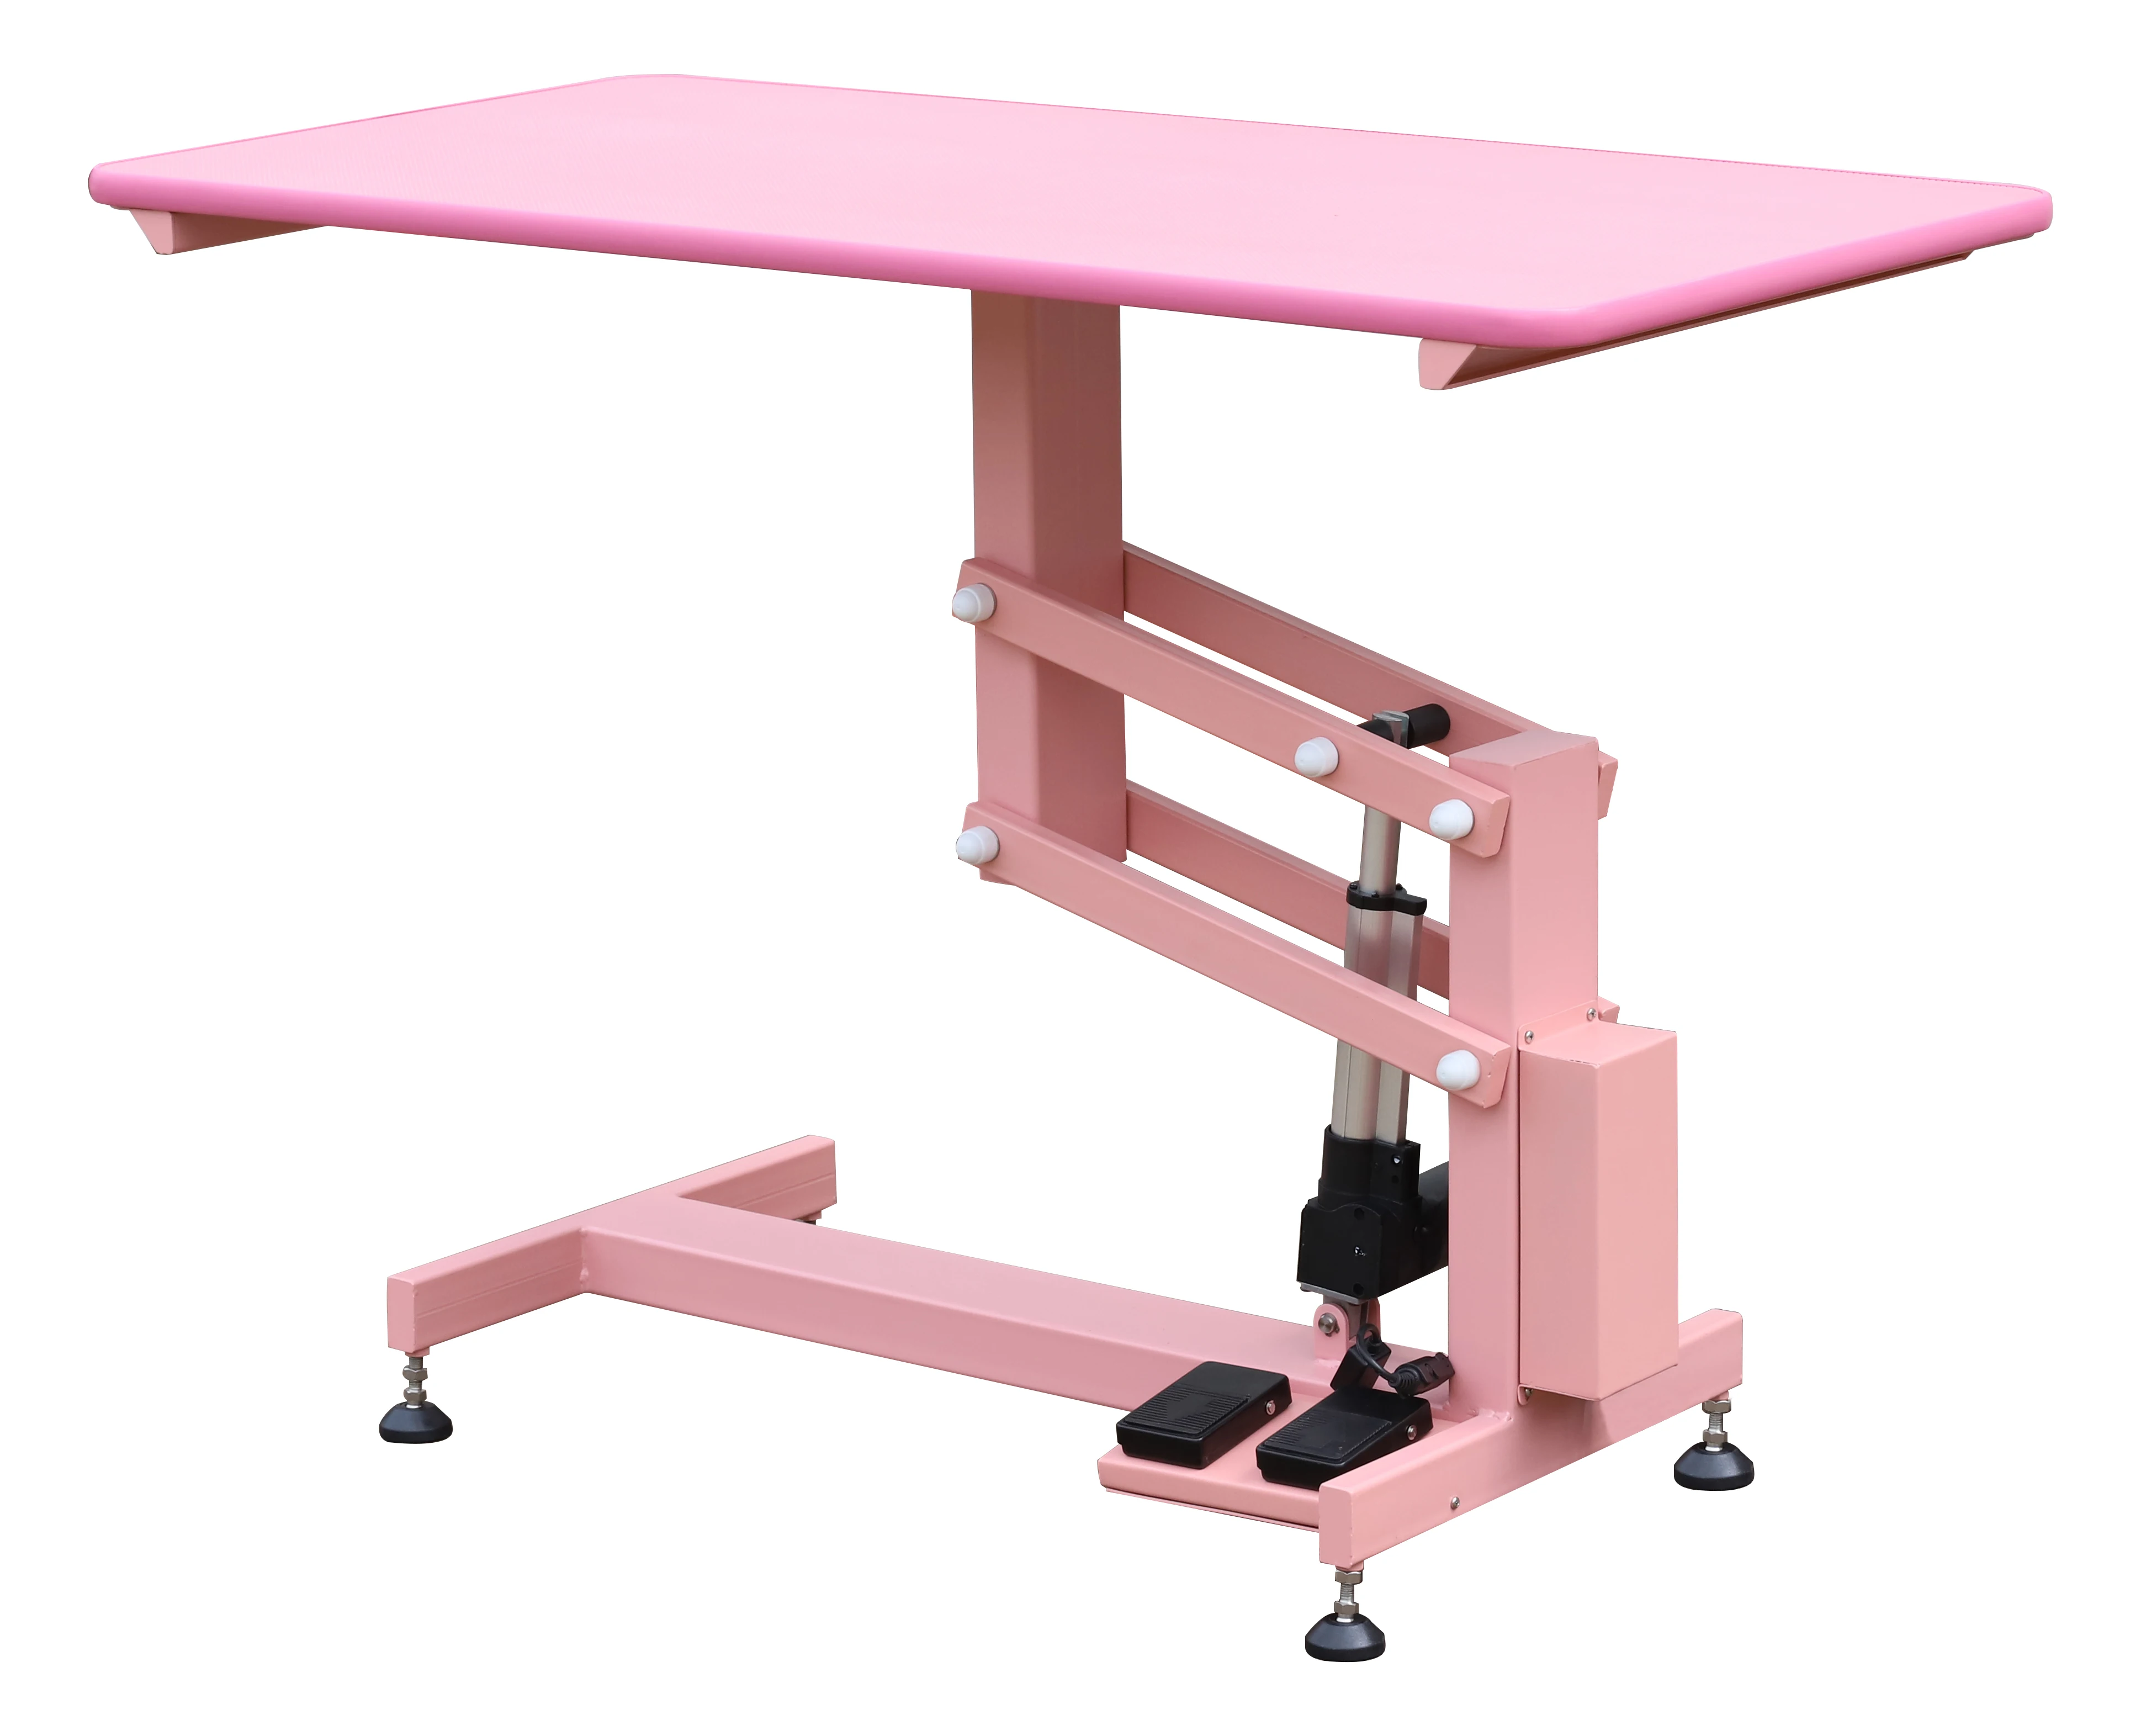 US Warehouse] 36 inch Steel Legs Foldable Nylon Clamp Adjustable Arm Rubber Mat  Pet Grooming Table